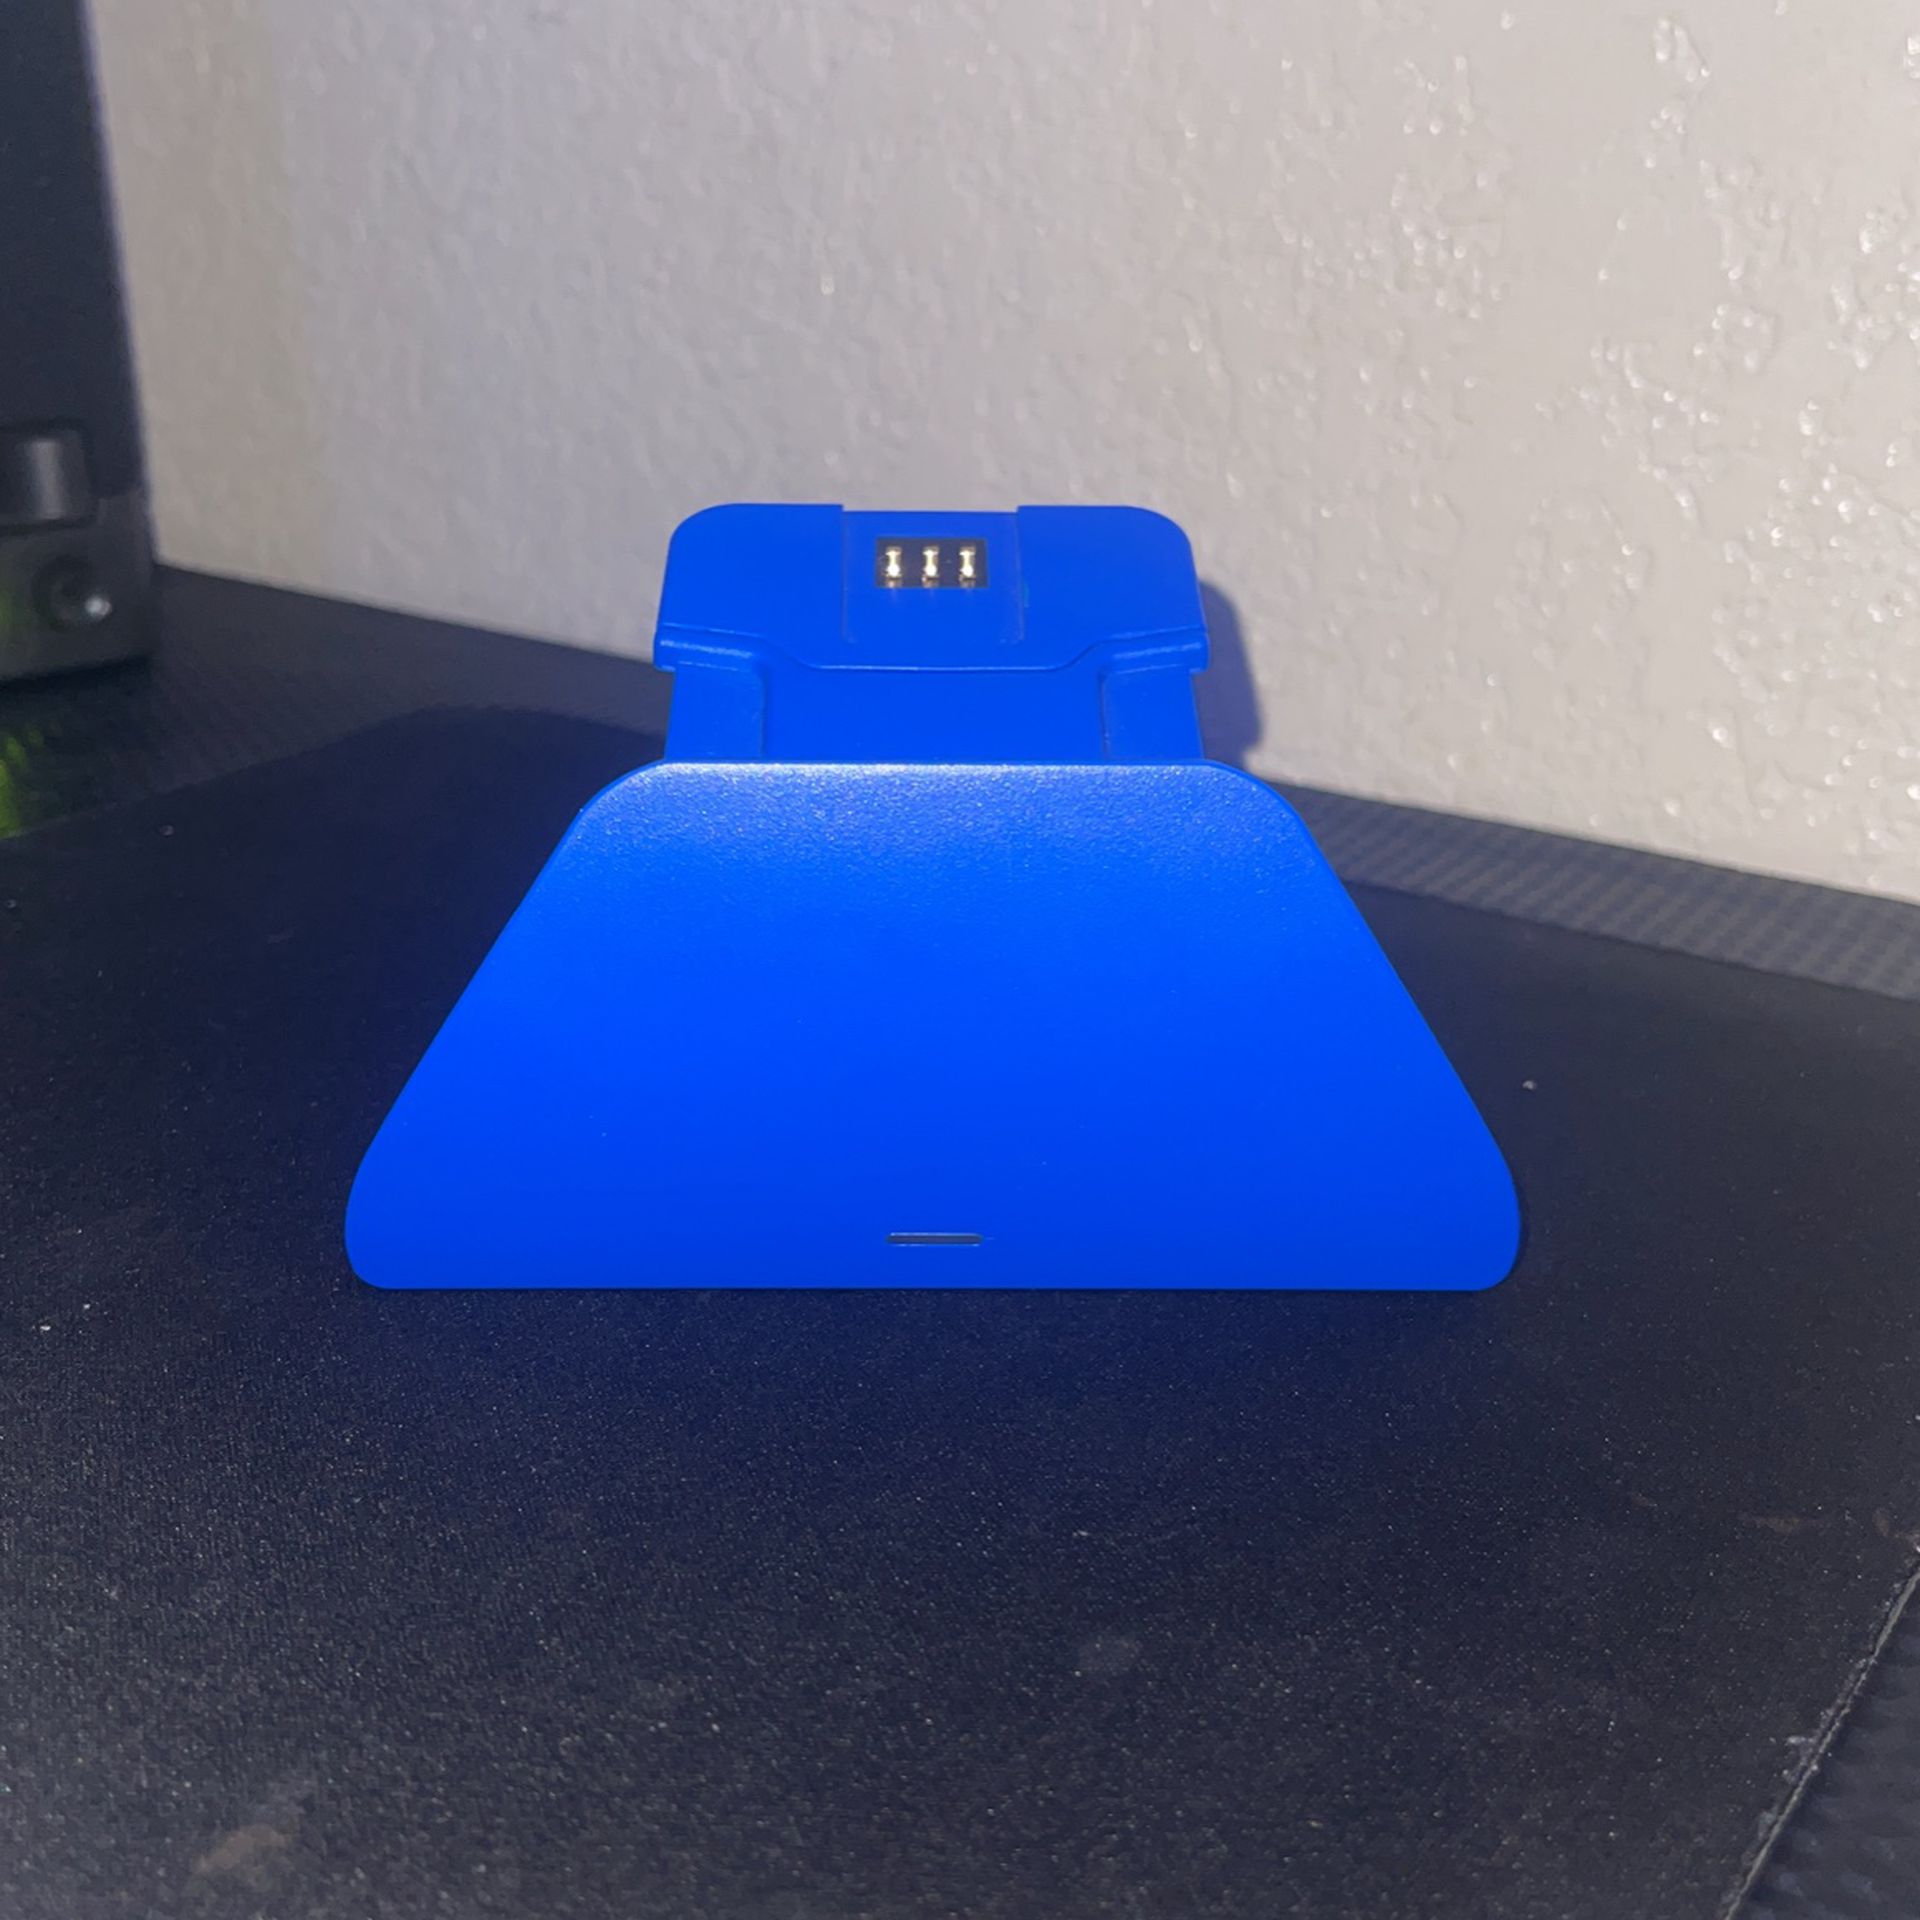 Razor Controller Charging Stand 